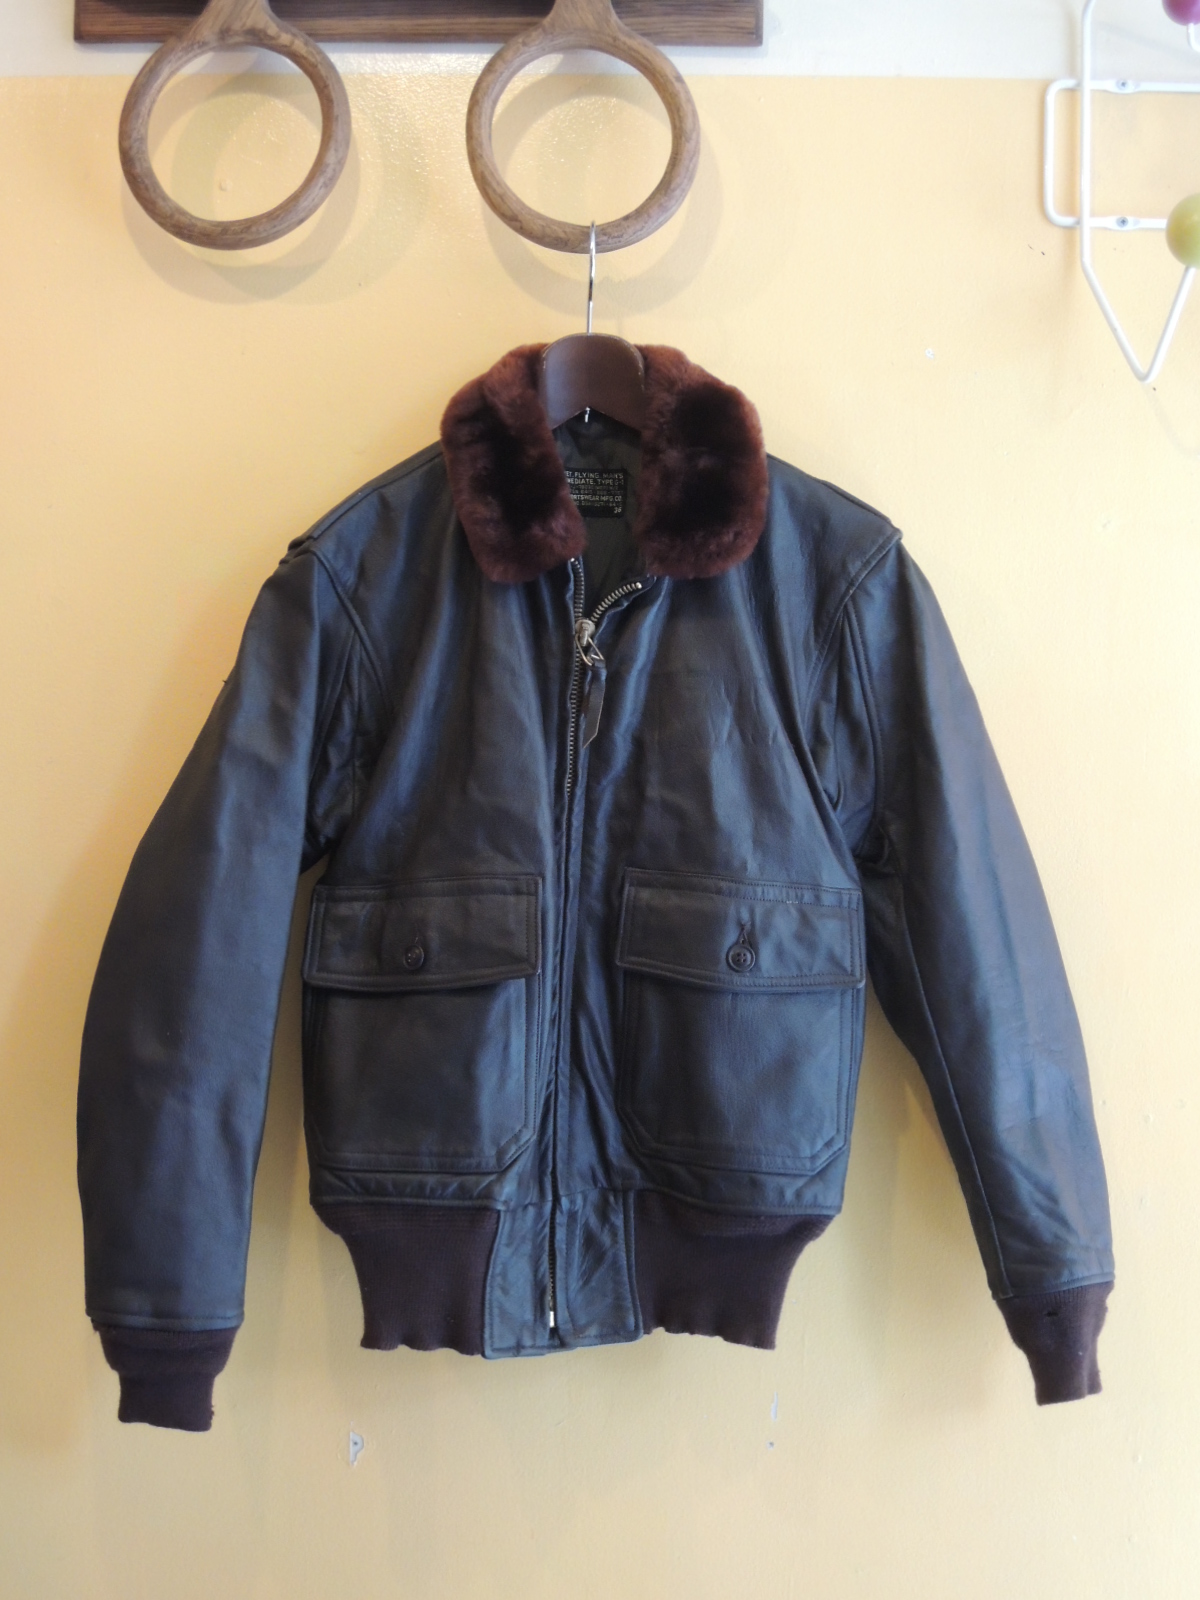 60's G-1 FLIGHT LEATHER JACKET (STAR SPORTSWEAR MFG. CO.): container